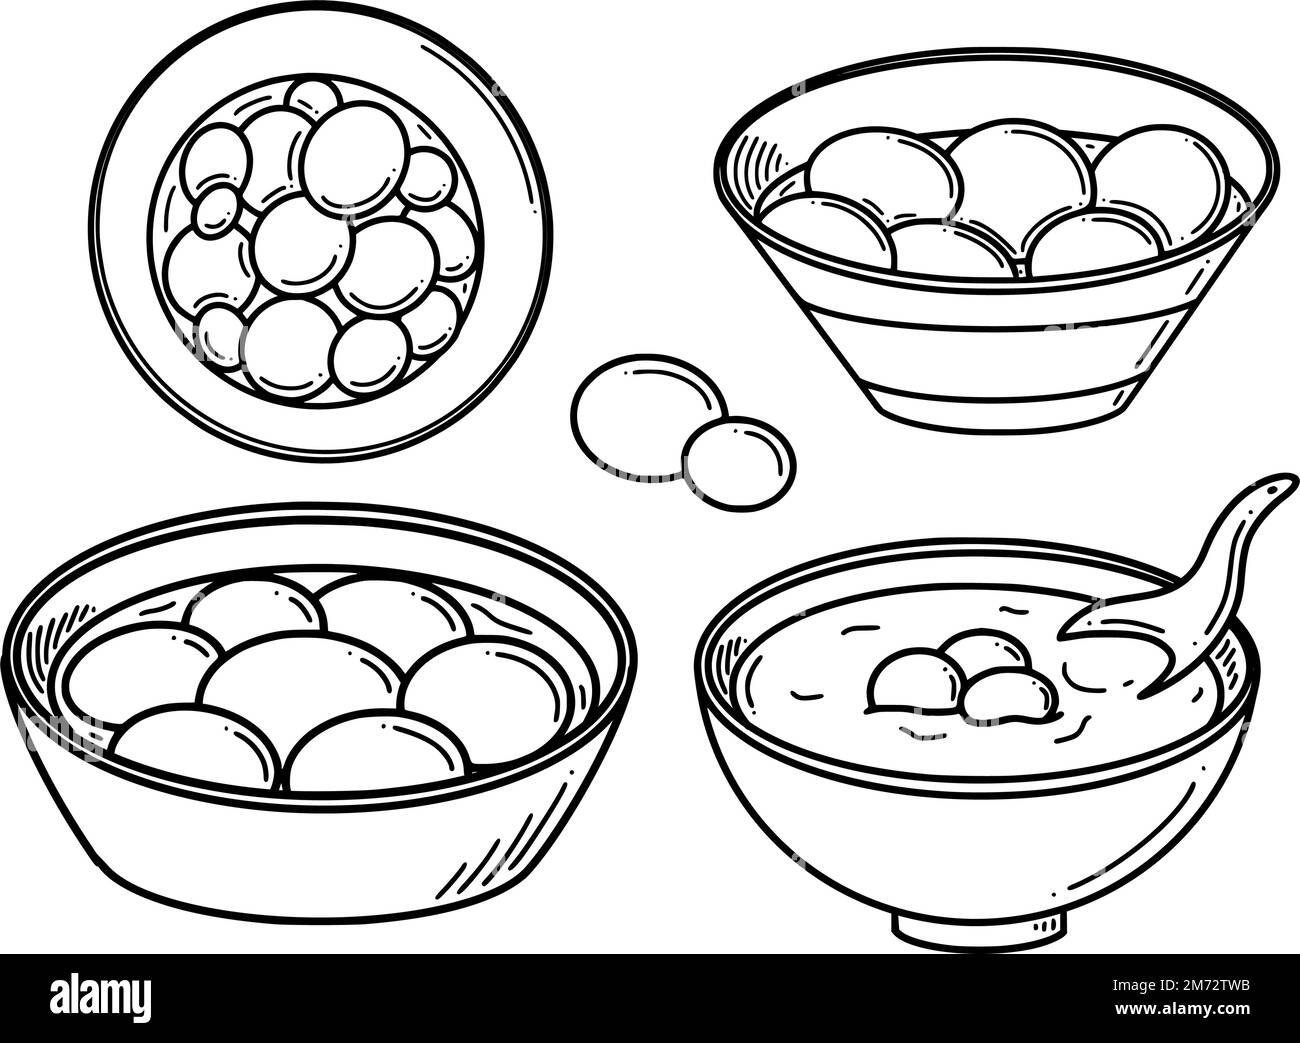 Tang yuan translation from Chinese Sweet dumpling soup vector illustration. Chinese New year dessert tangyuan in doodle style. Stock Vector